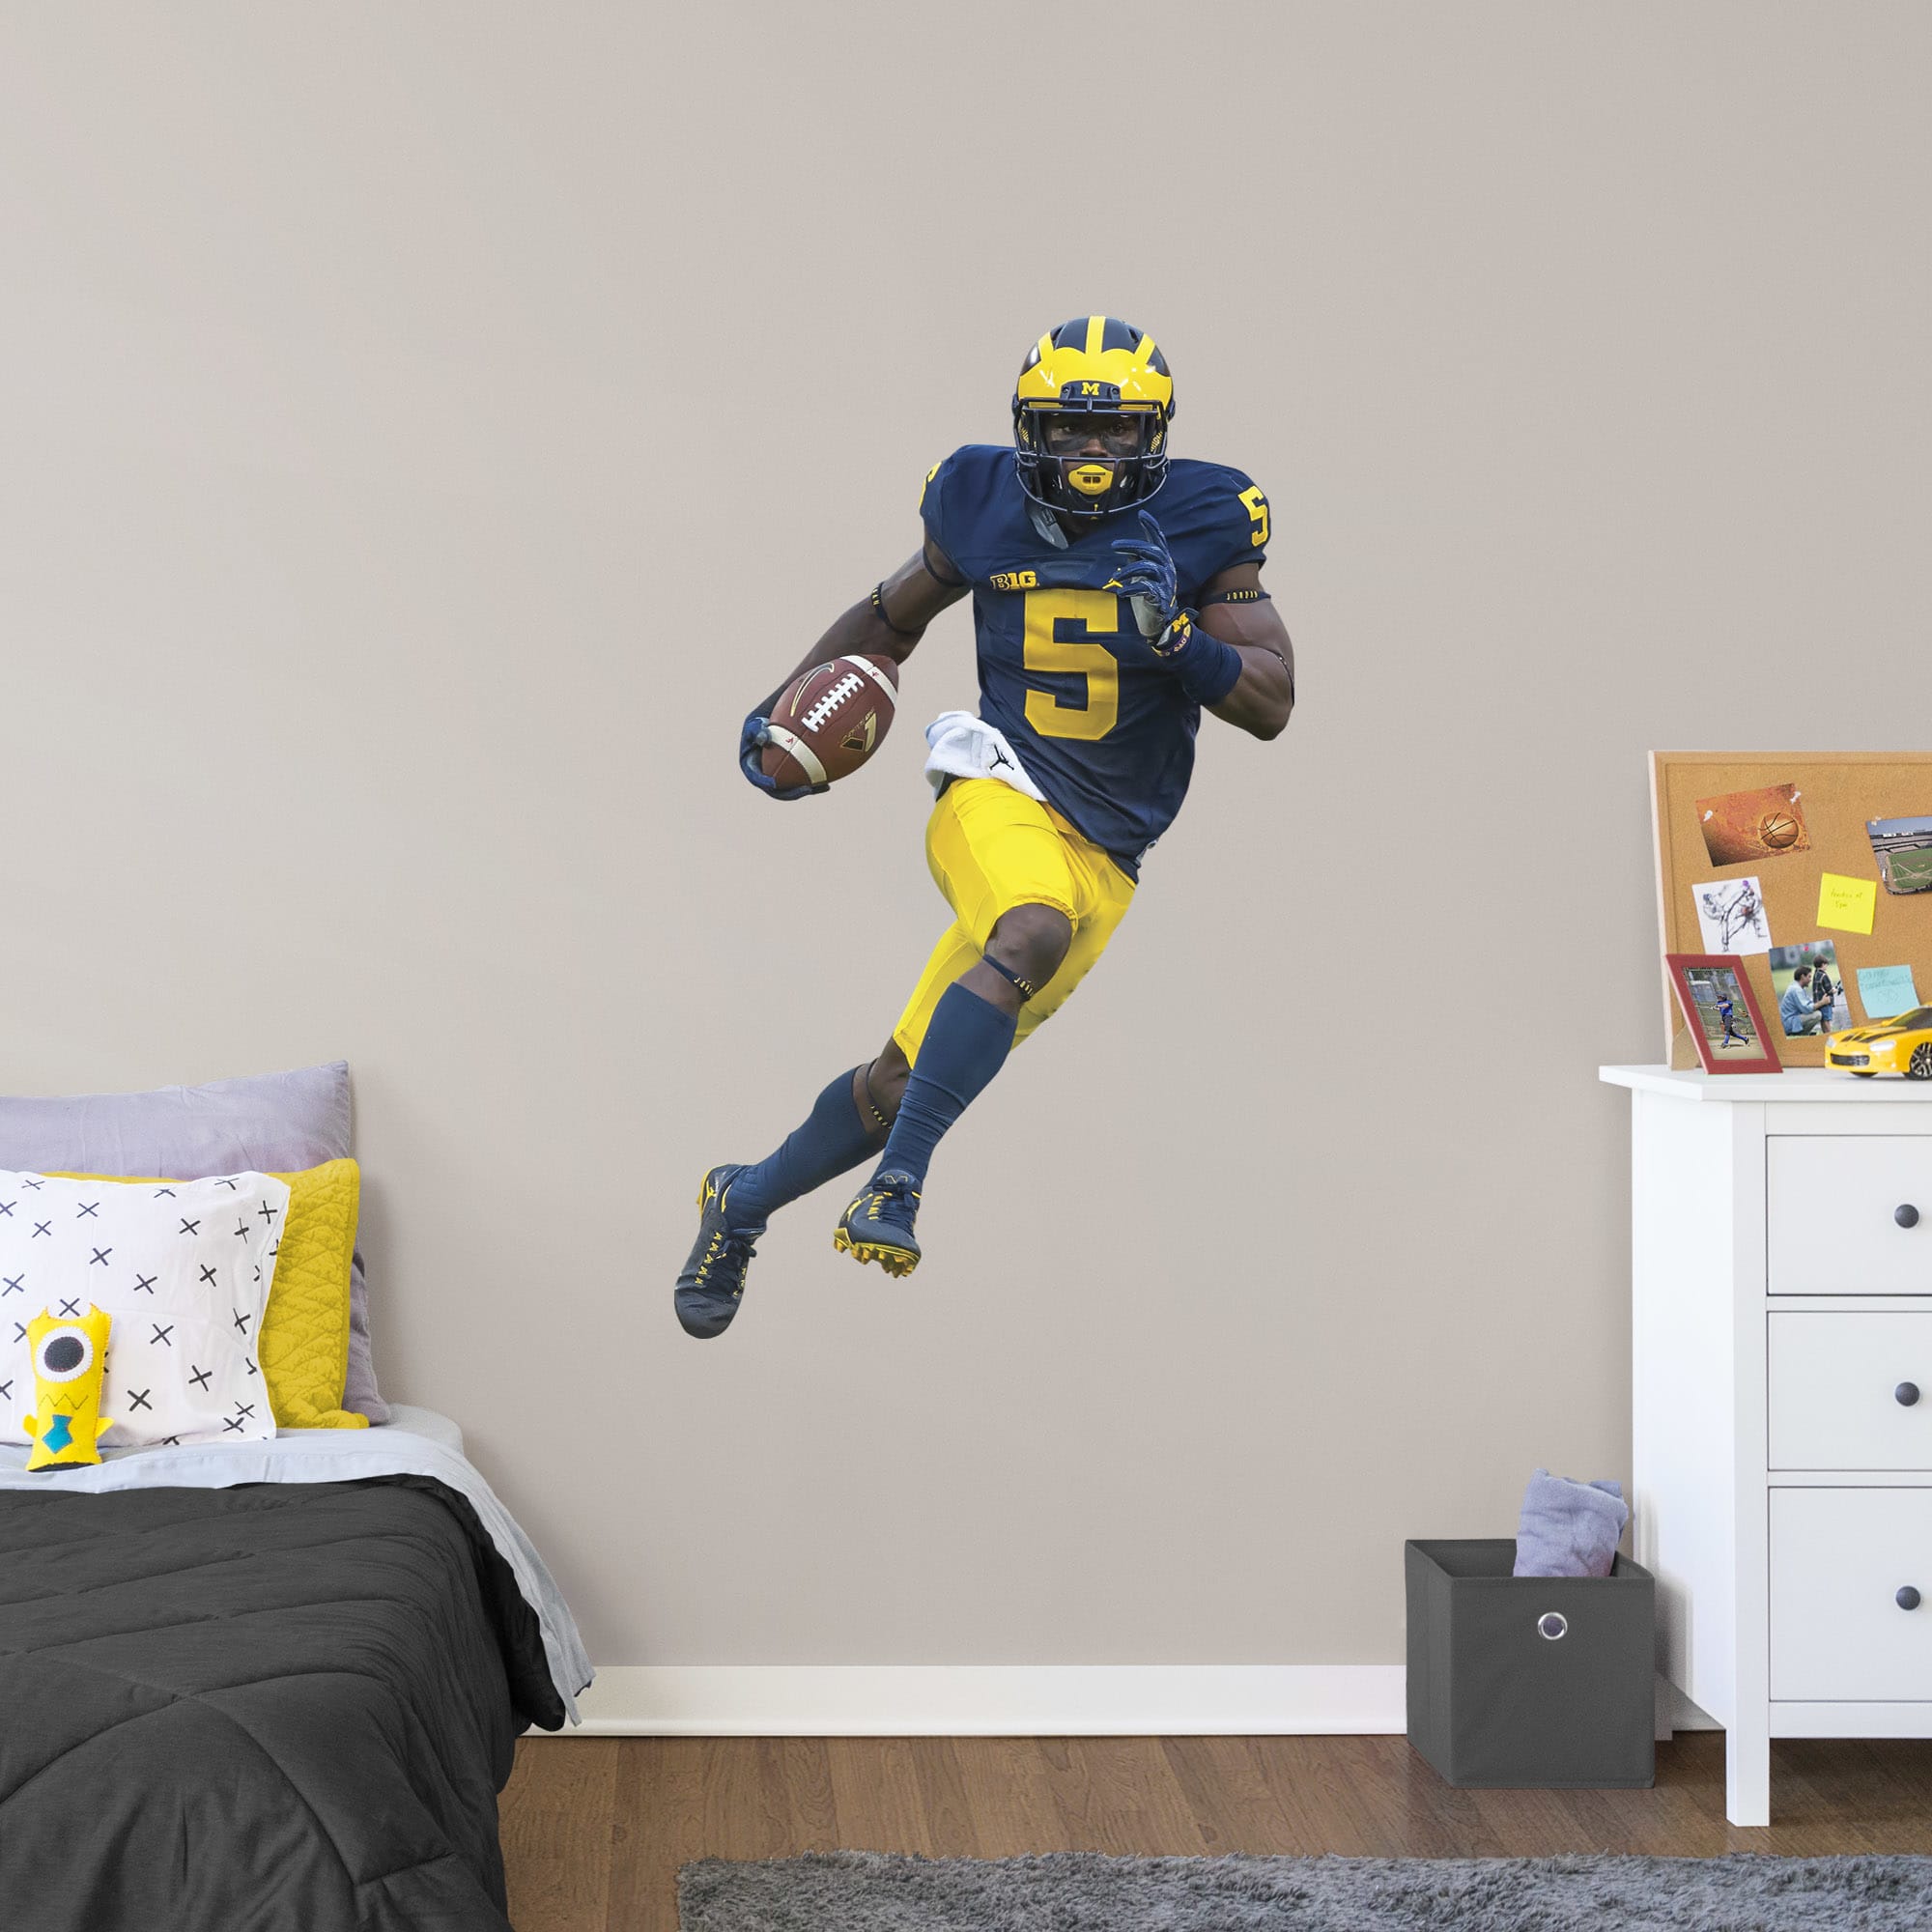 Jabrill Peppers for Michigan Wolverines: Michigan - Officially Licensed Removable Wall Decal Giant Athlete + 2 Decals (31"W x 51